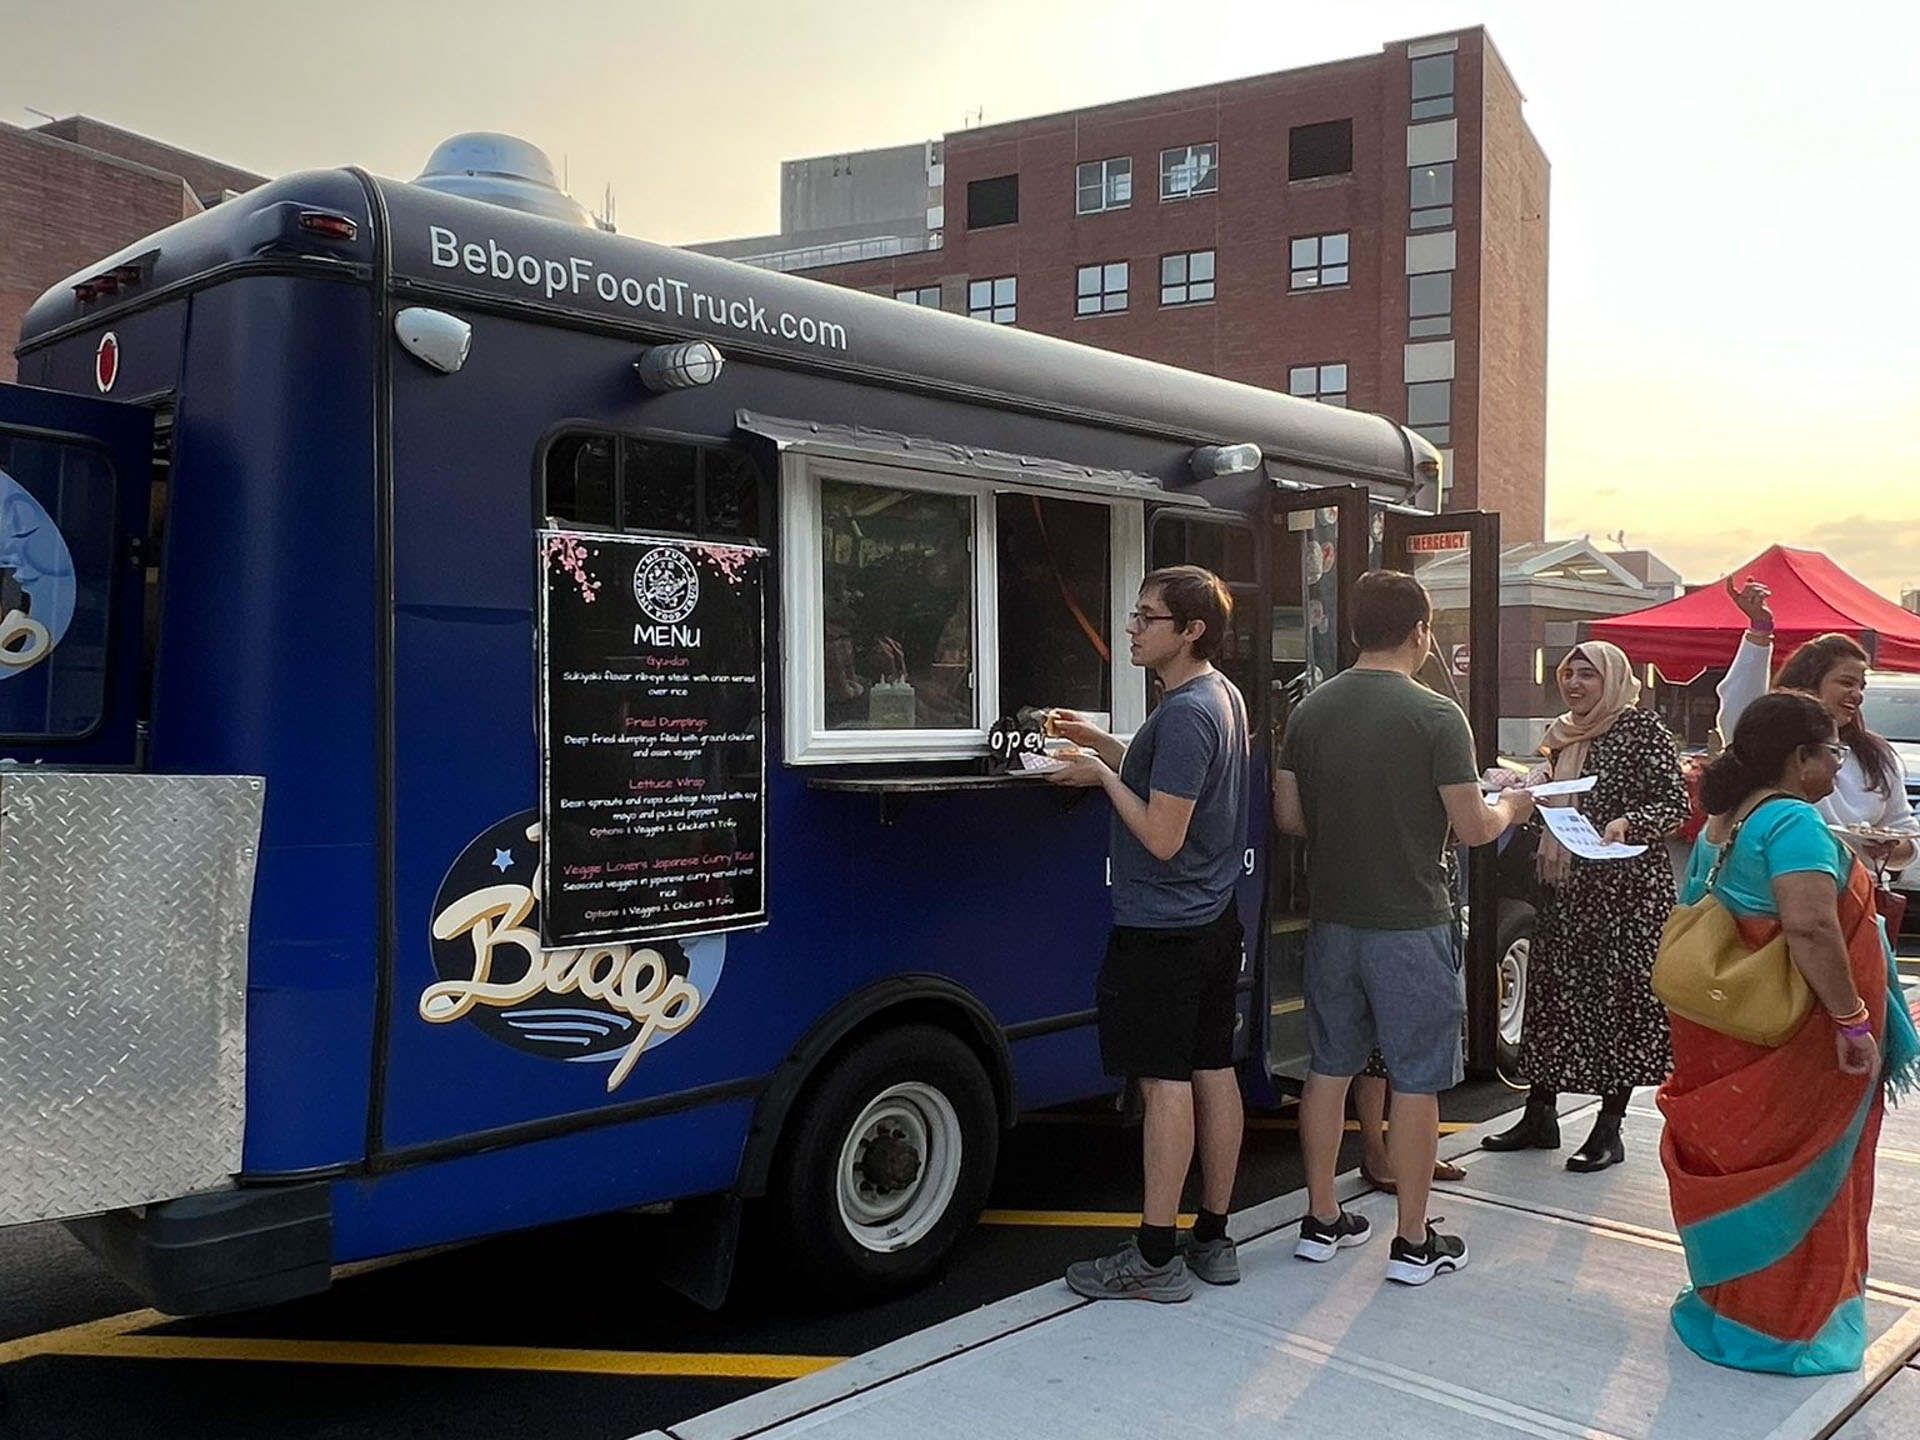 Food trucks and fun galore at our intern meet-and-greet.